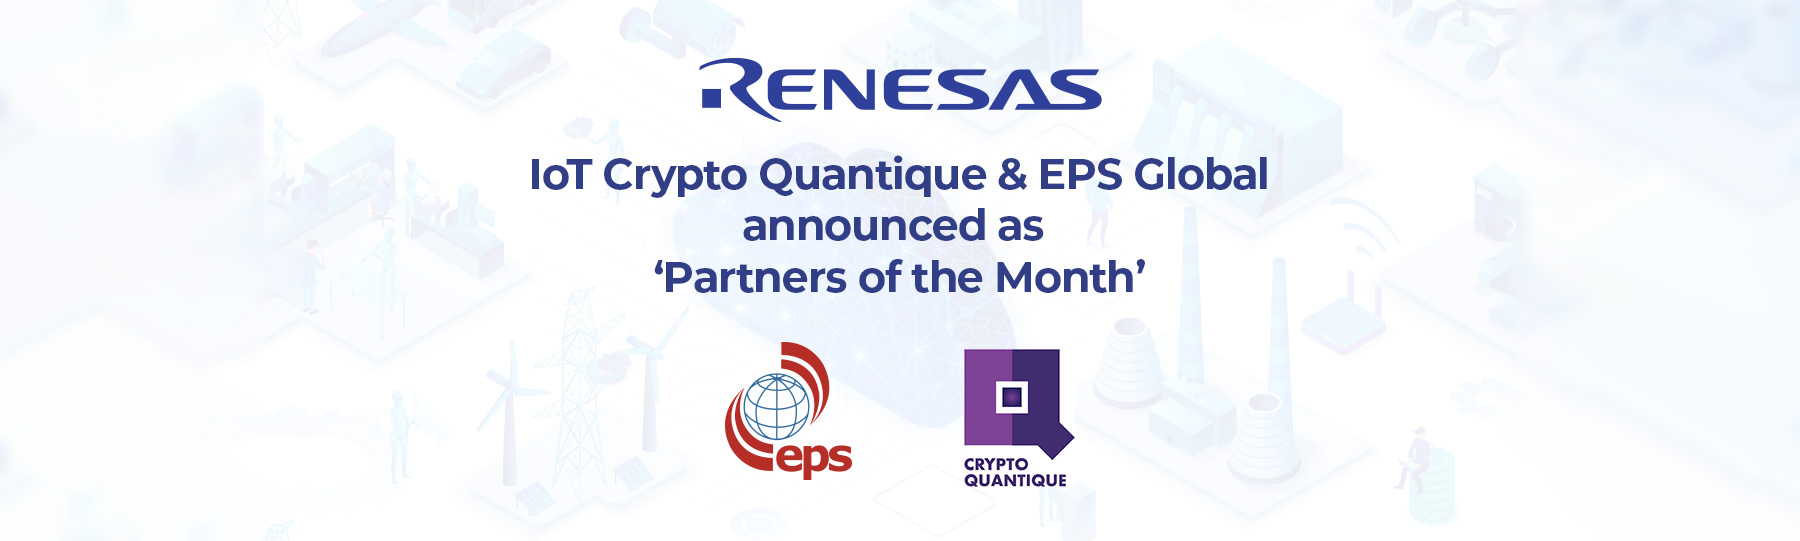 Renesas announces IoT Crypto Quantique and EPS Global as ‘Partners of the Month’